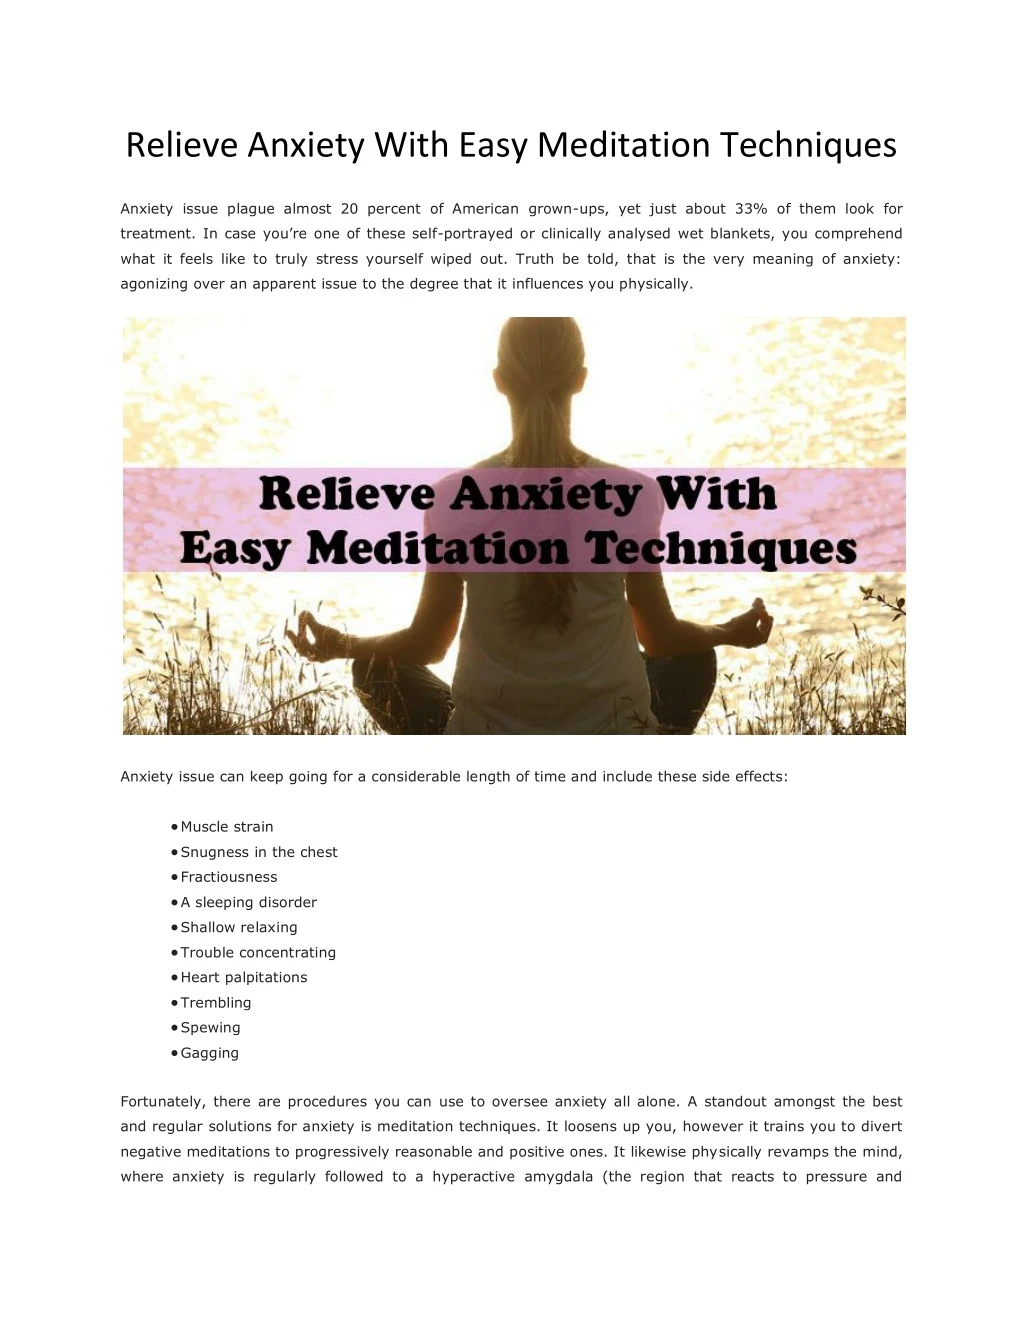 relieve anxiety with easy meditation techniques